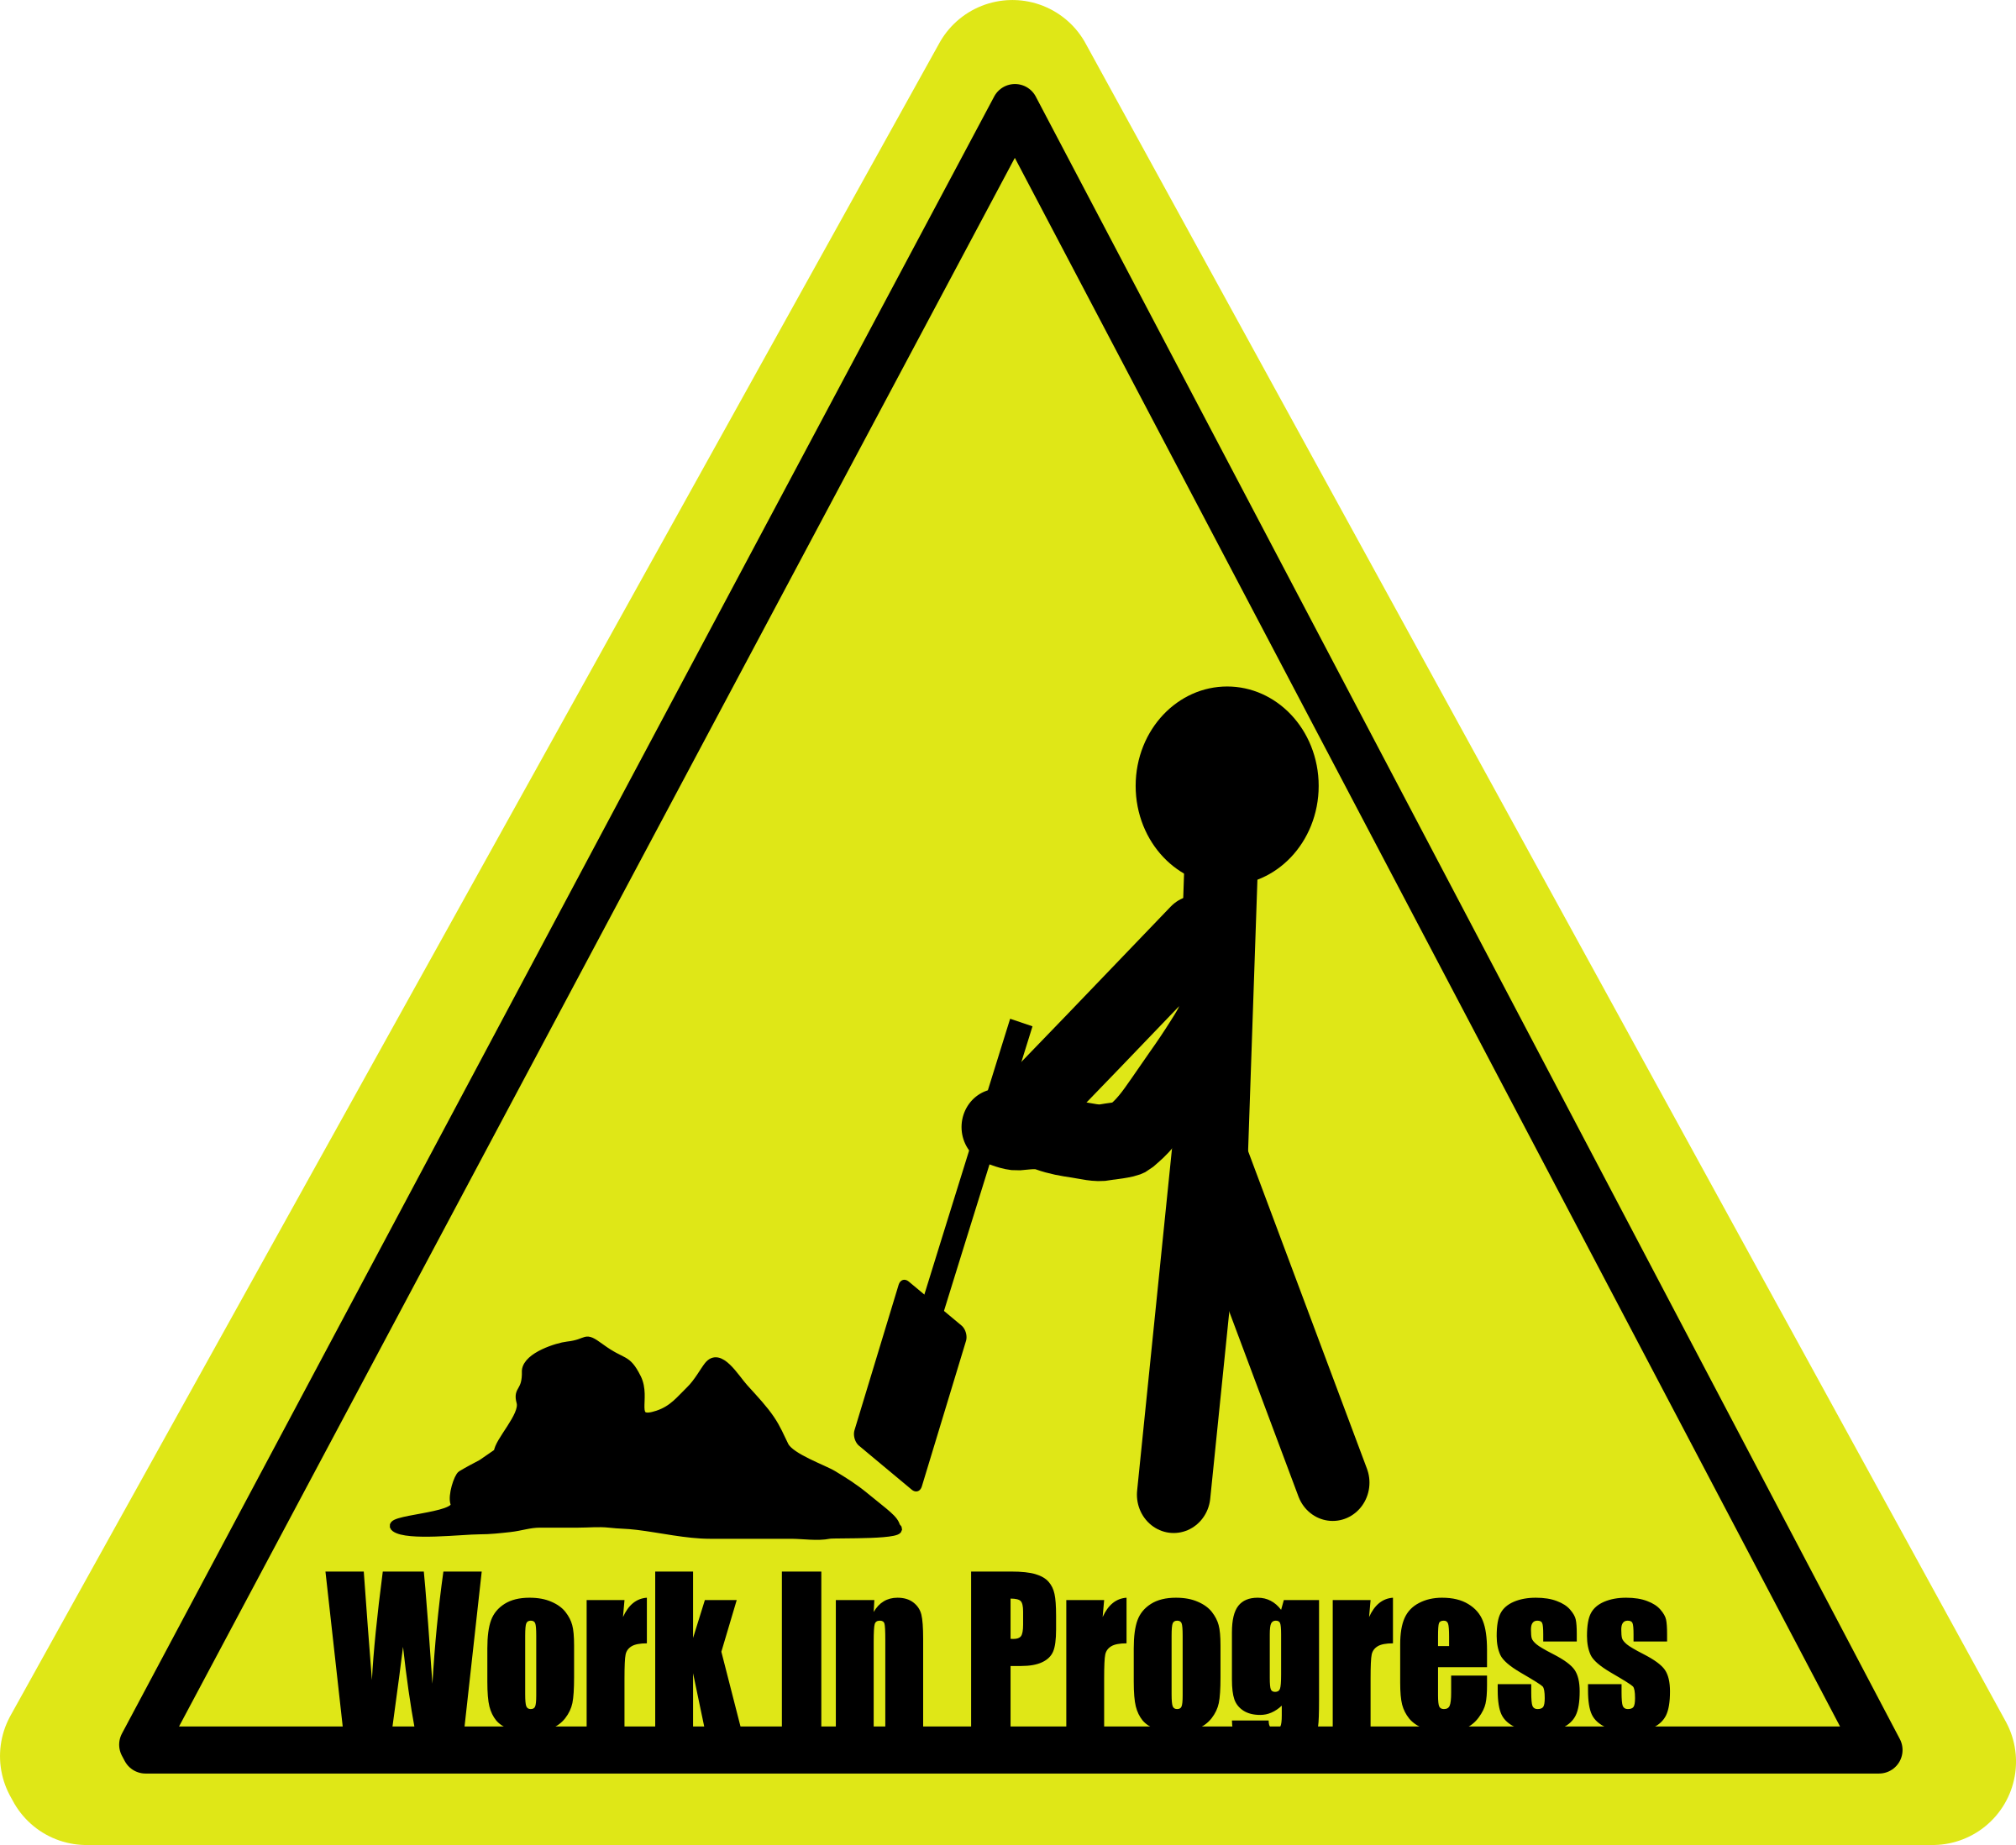 Download This Free Icons Png Design Of Work In Progress Png Image With No Background Pngkey Com